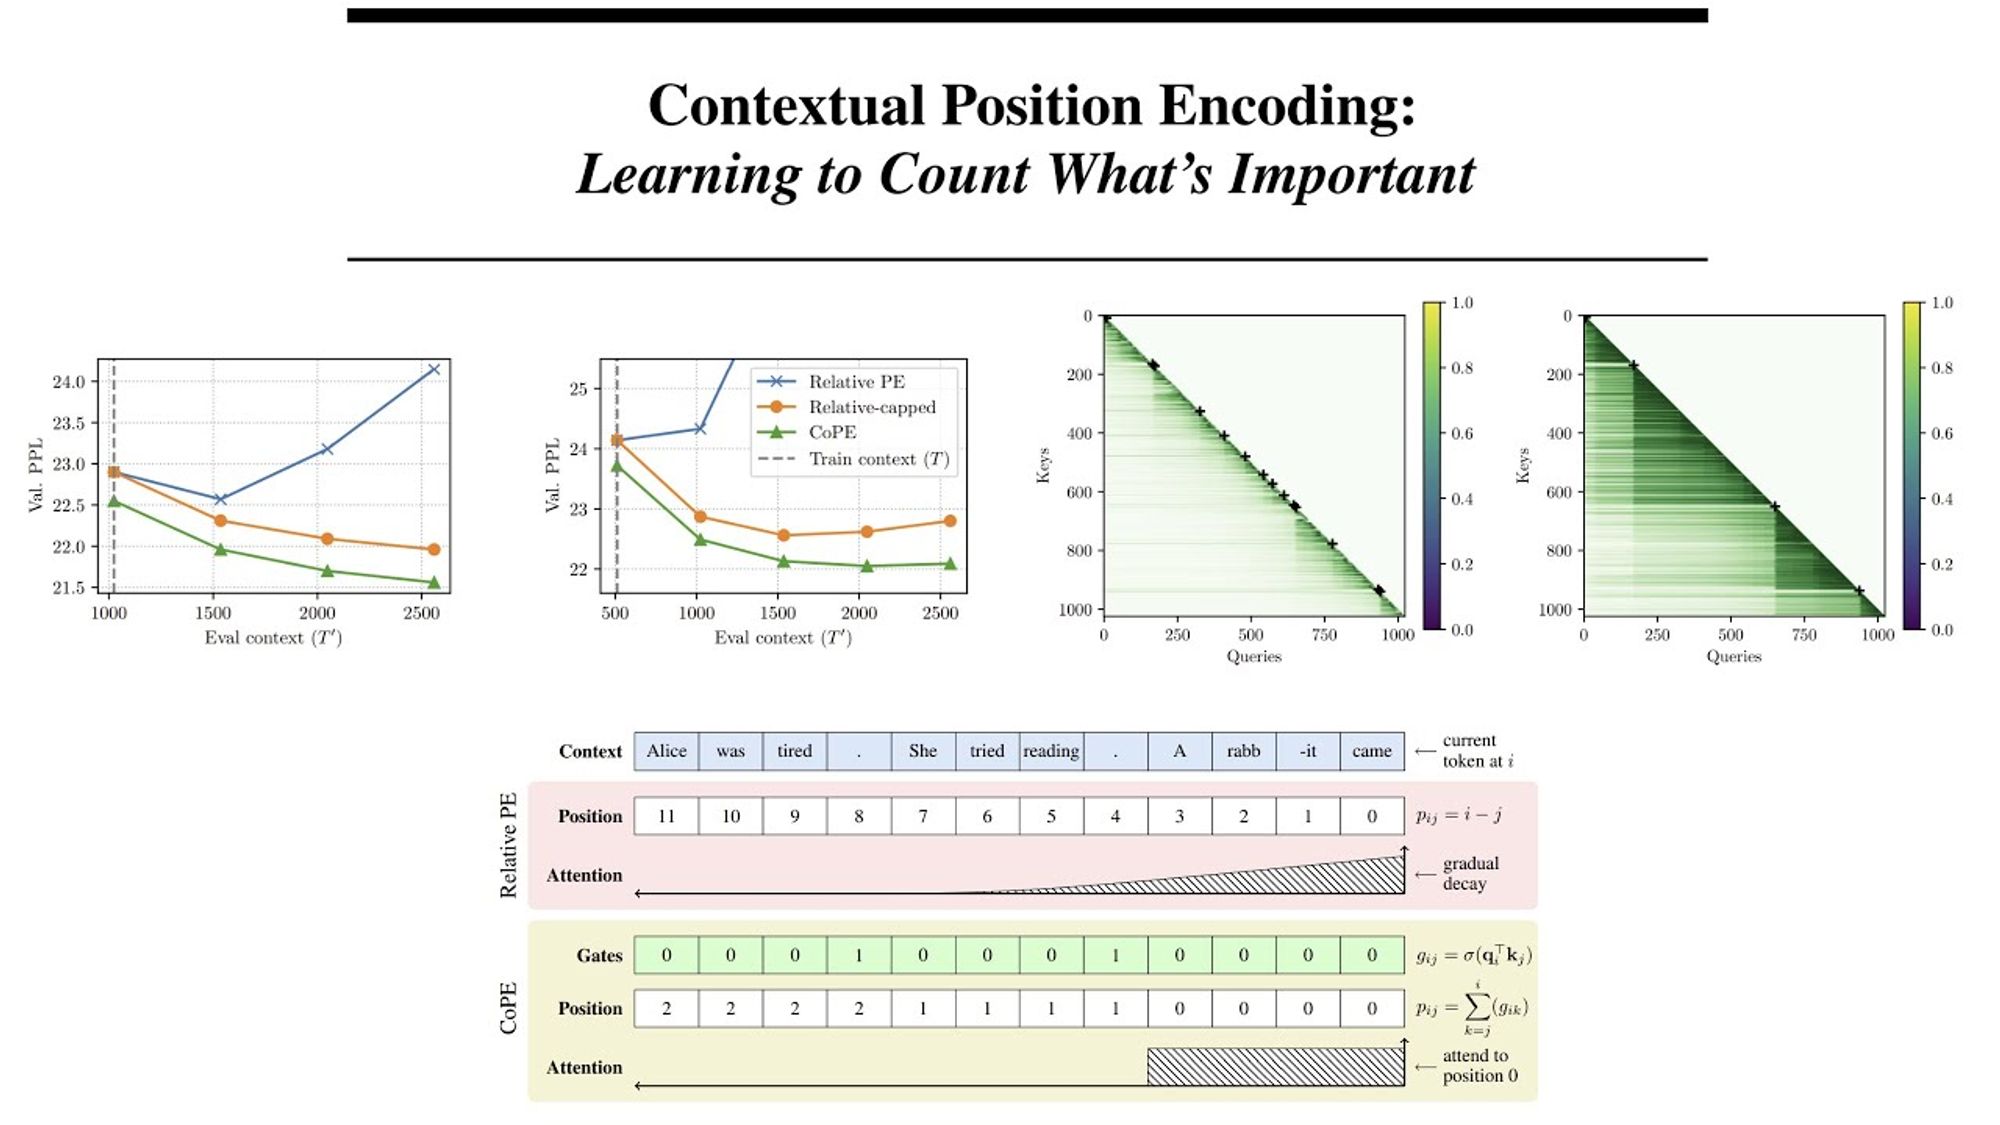 CoPE - Contextual Position Encoding: Learning to Count What's Important